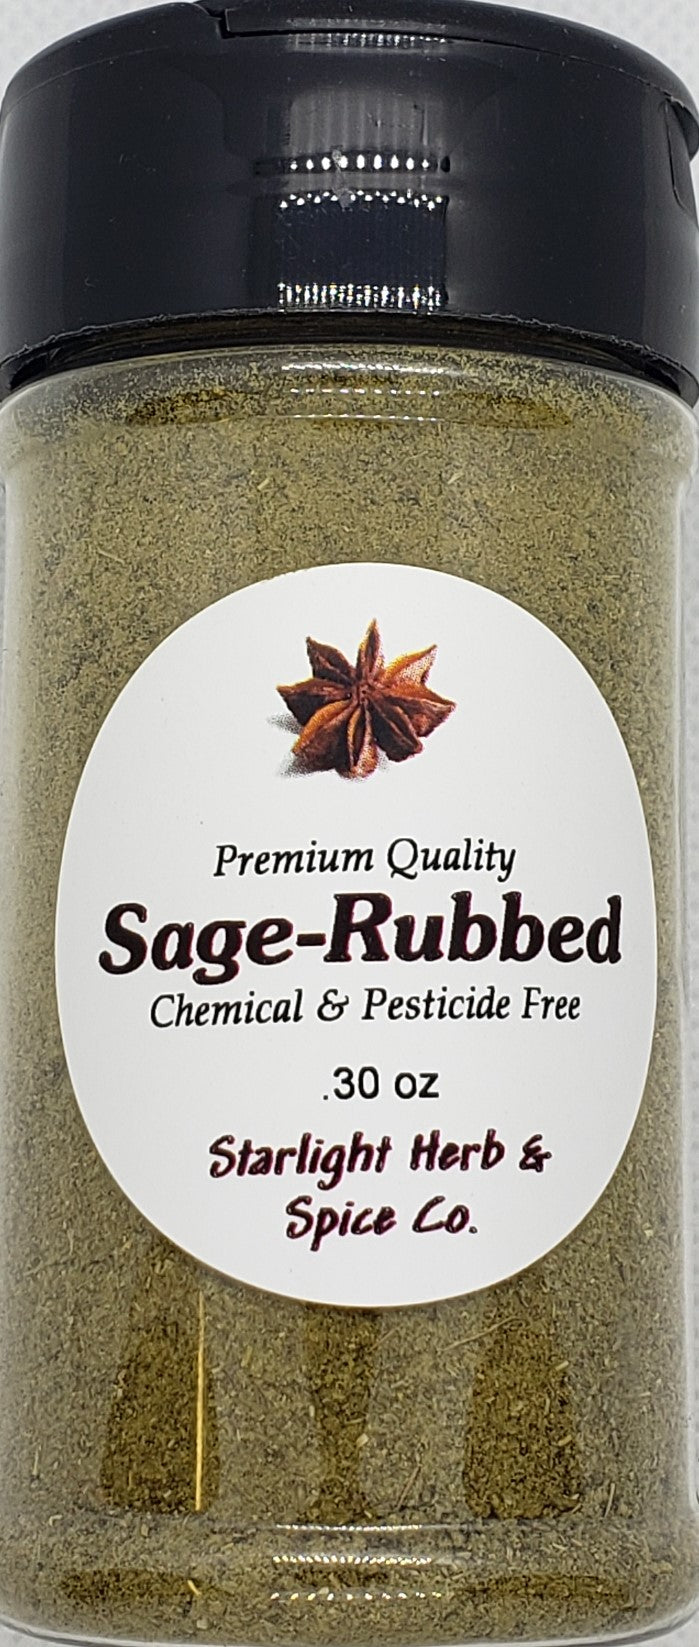 Sage, rubbed